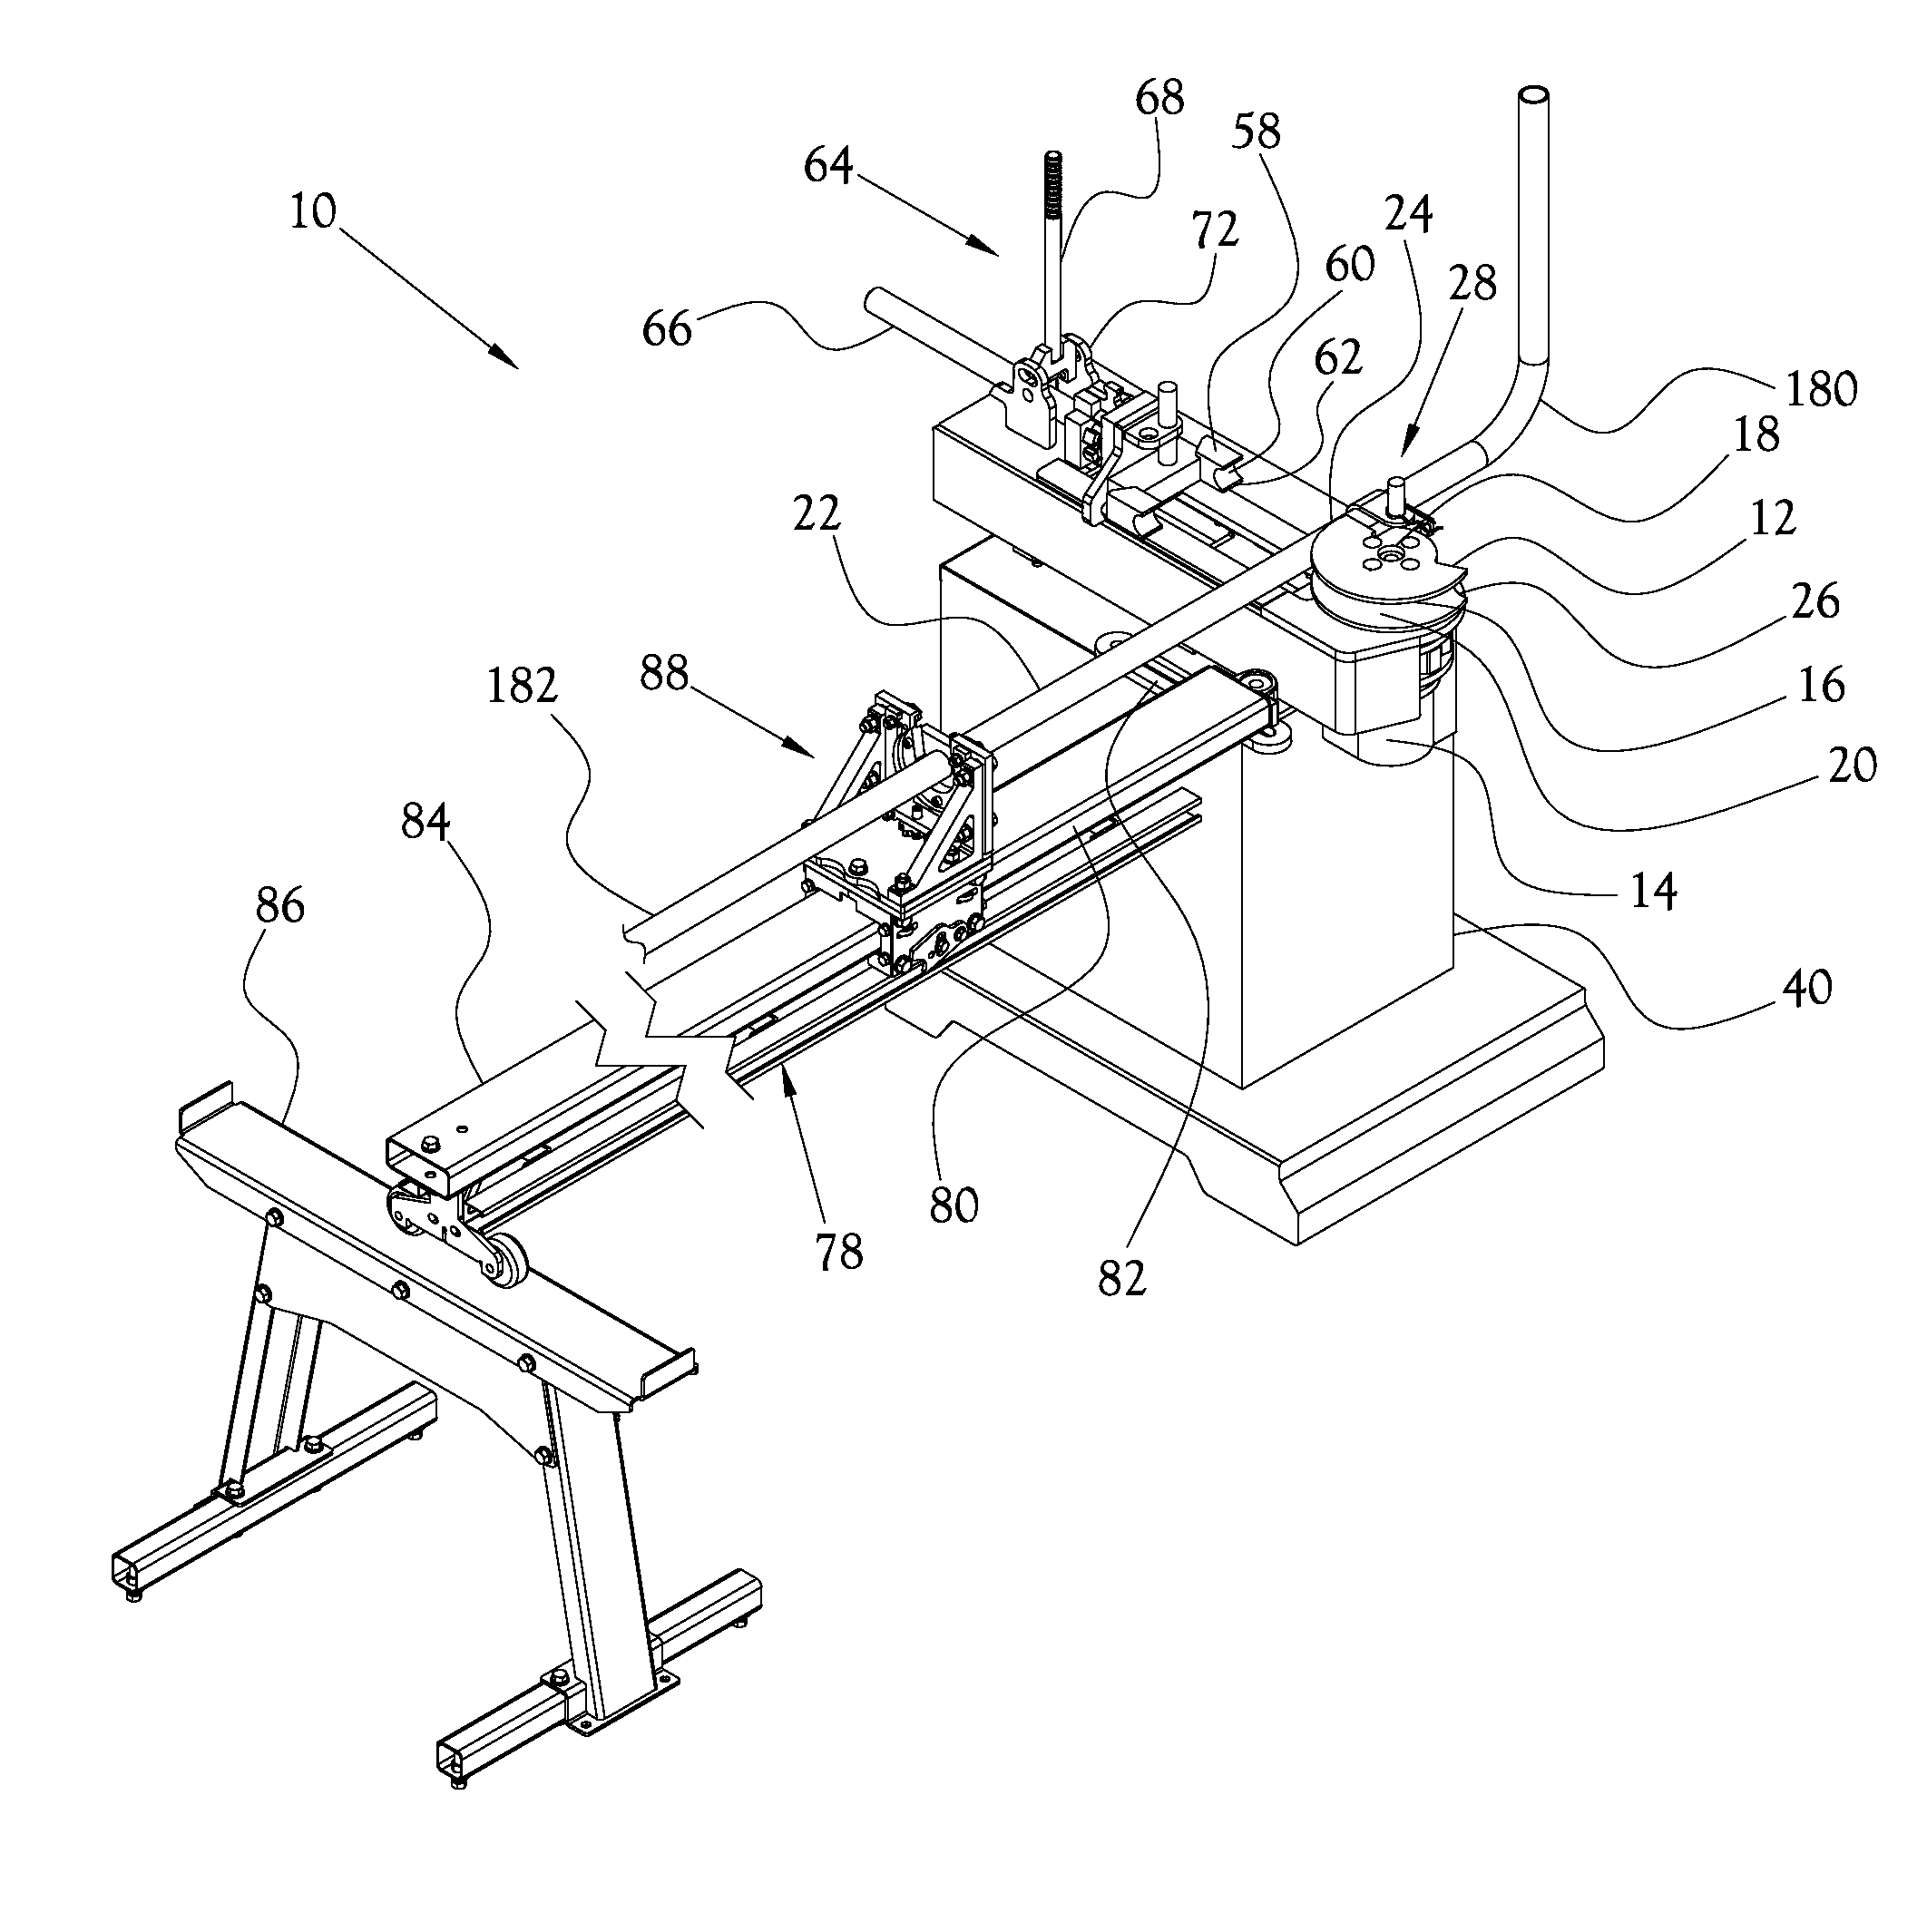 Tube Bending Machine With Reversible Clamp Assembly